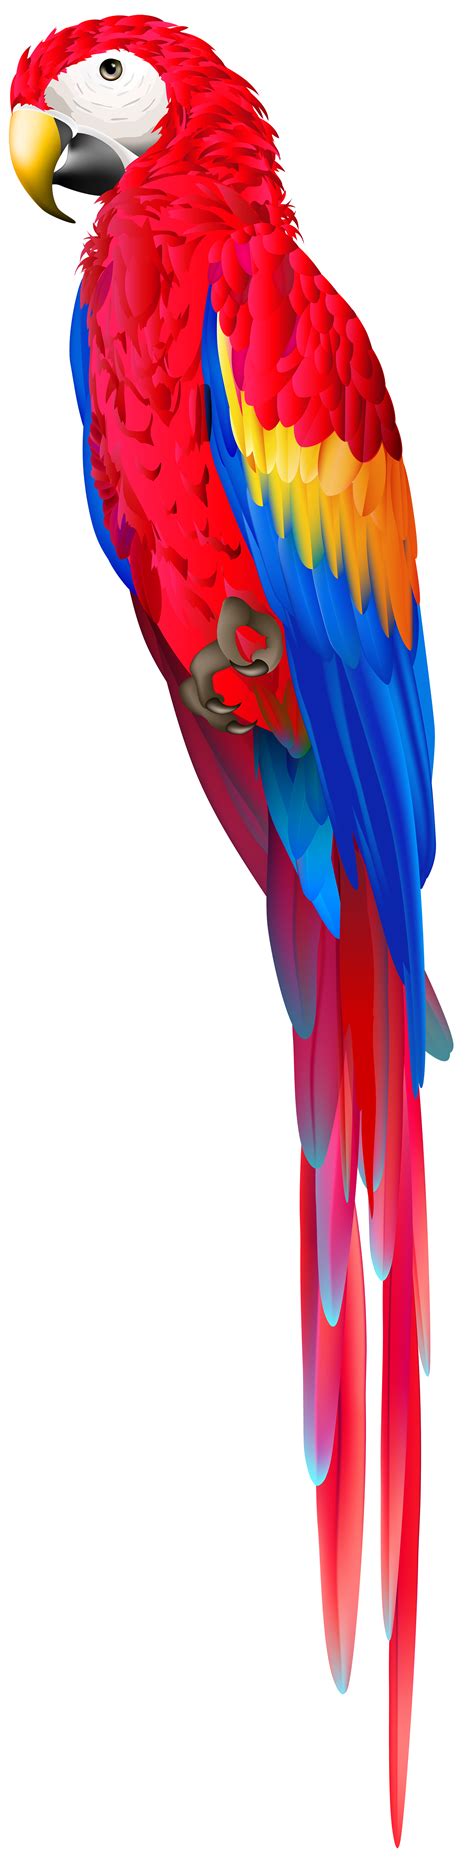 Colorful Parrot Clipart Large Size Png Image Pikpng